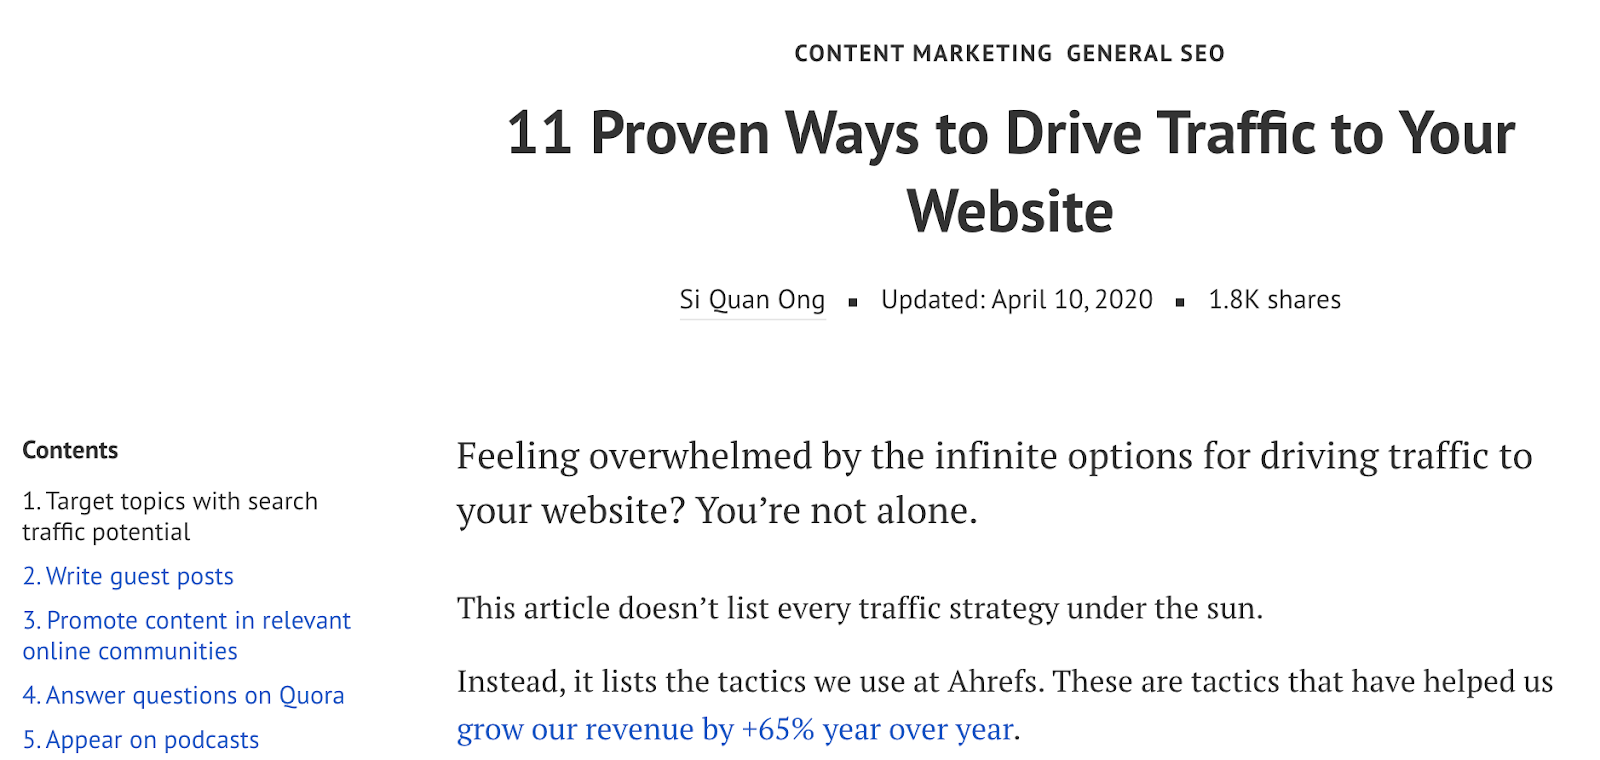 blog topic “11 proven ways to drive traffic to your website.”